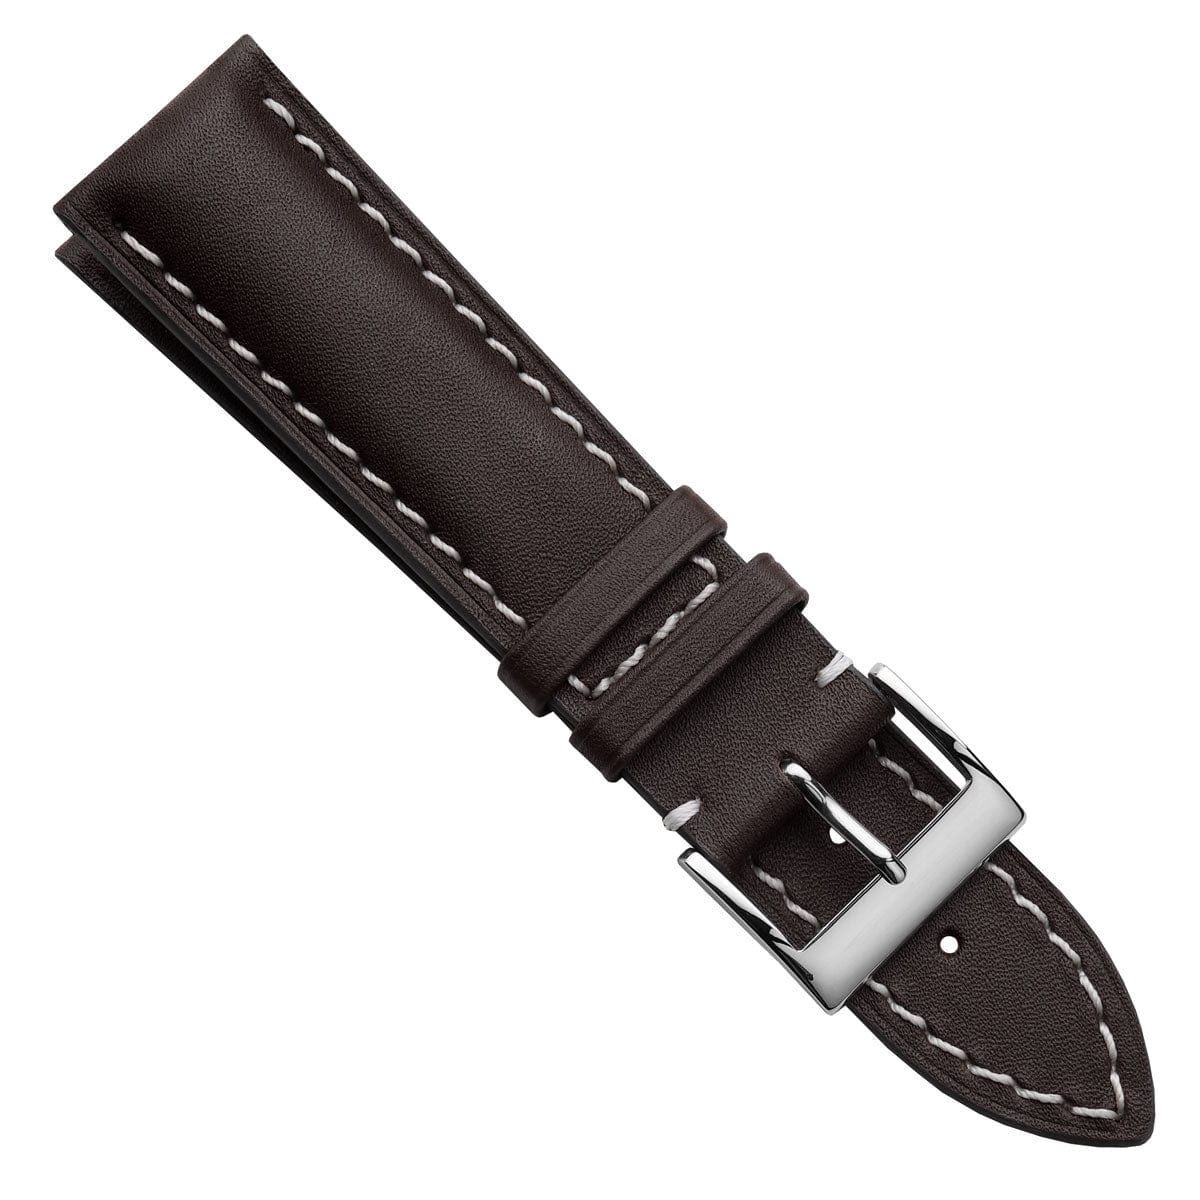 Ostend Thick Padded Leather Watch Strap - Baranil Chocolate Brown